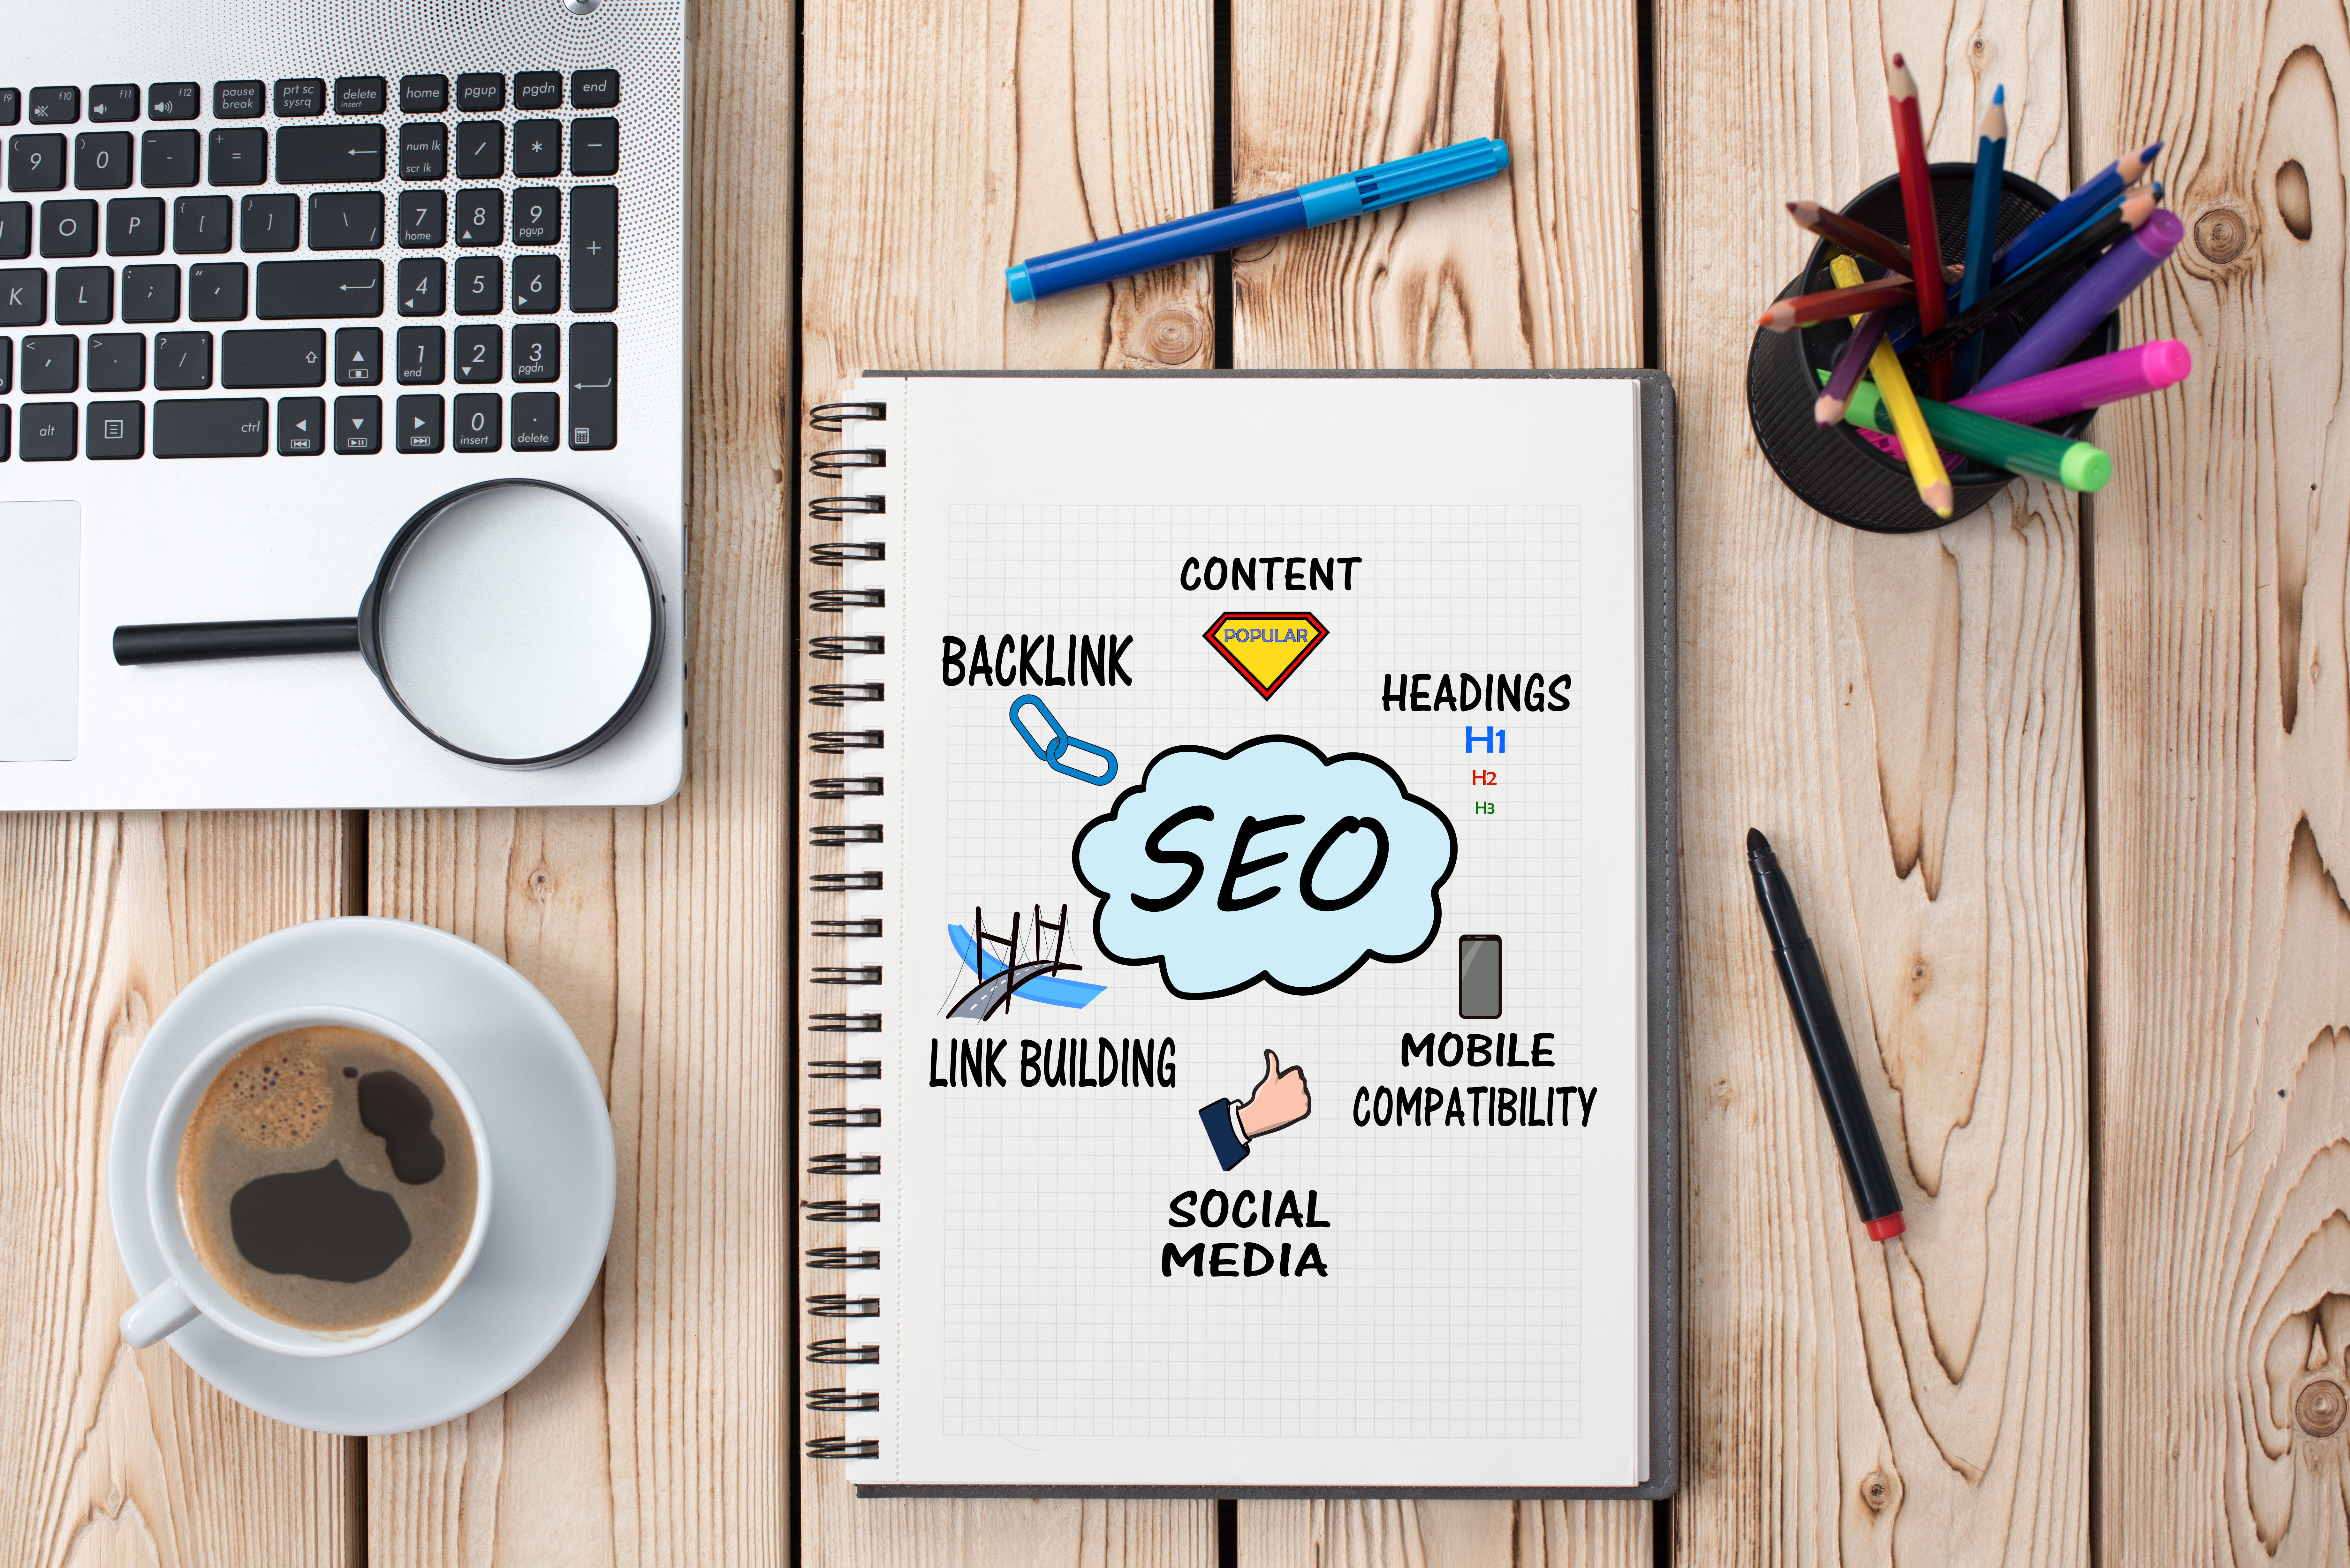 SEO contain backlinks, content, headings, mobile compatibility, social media, and link building